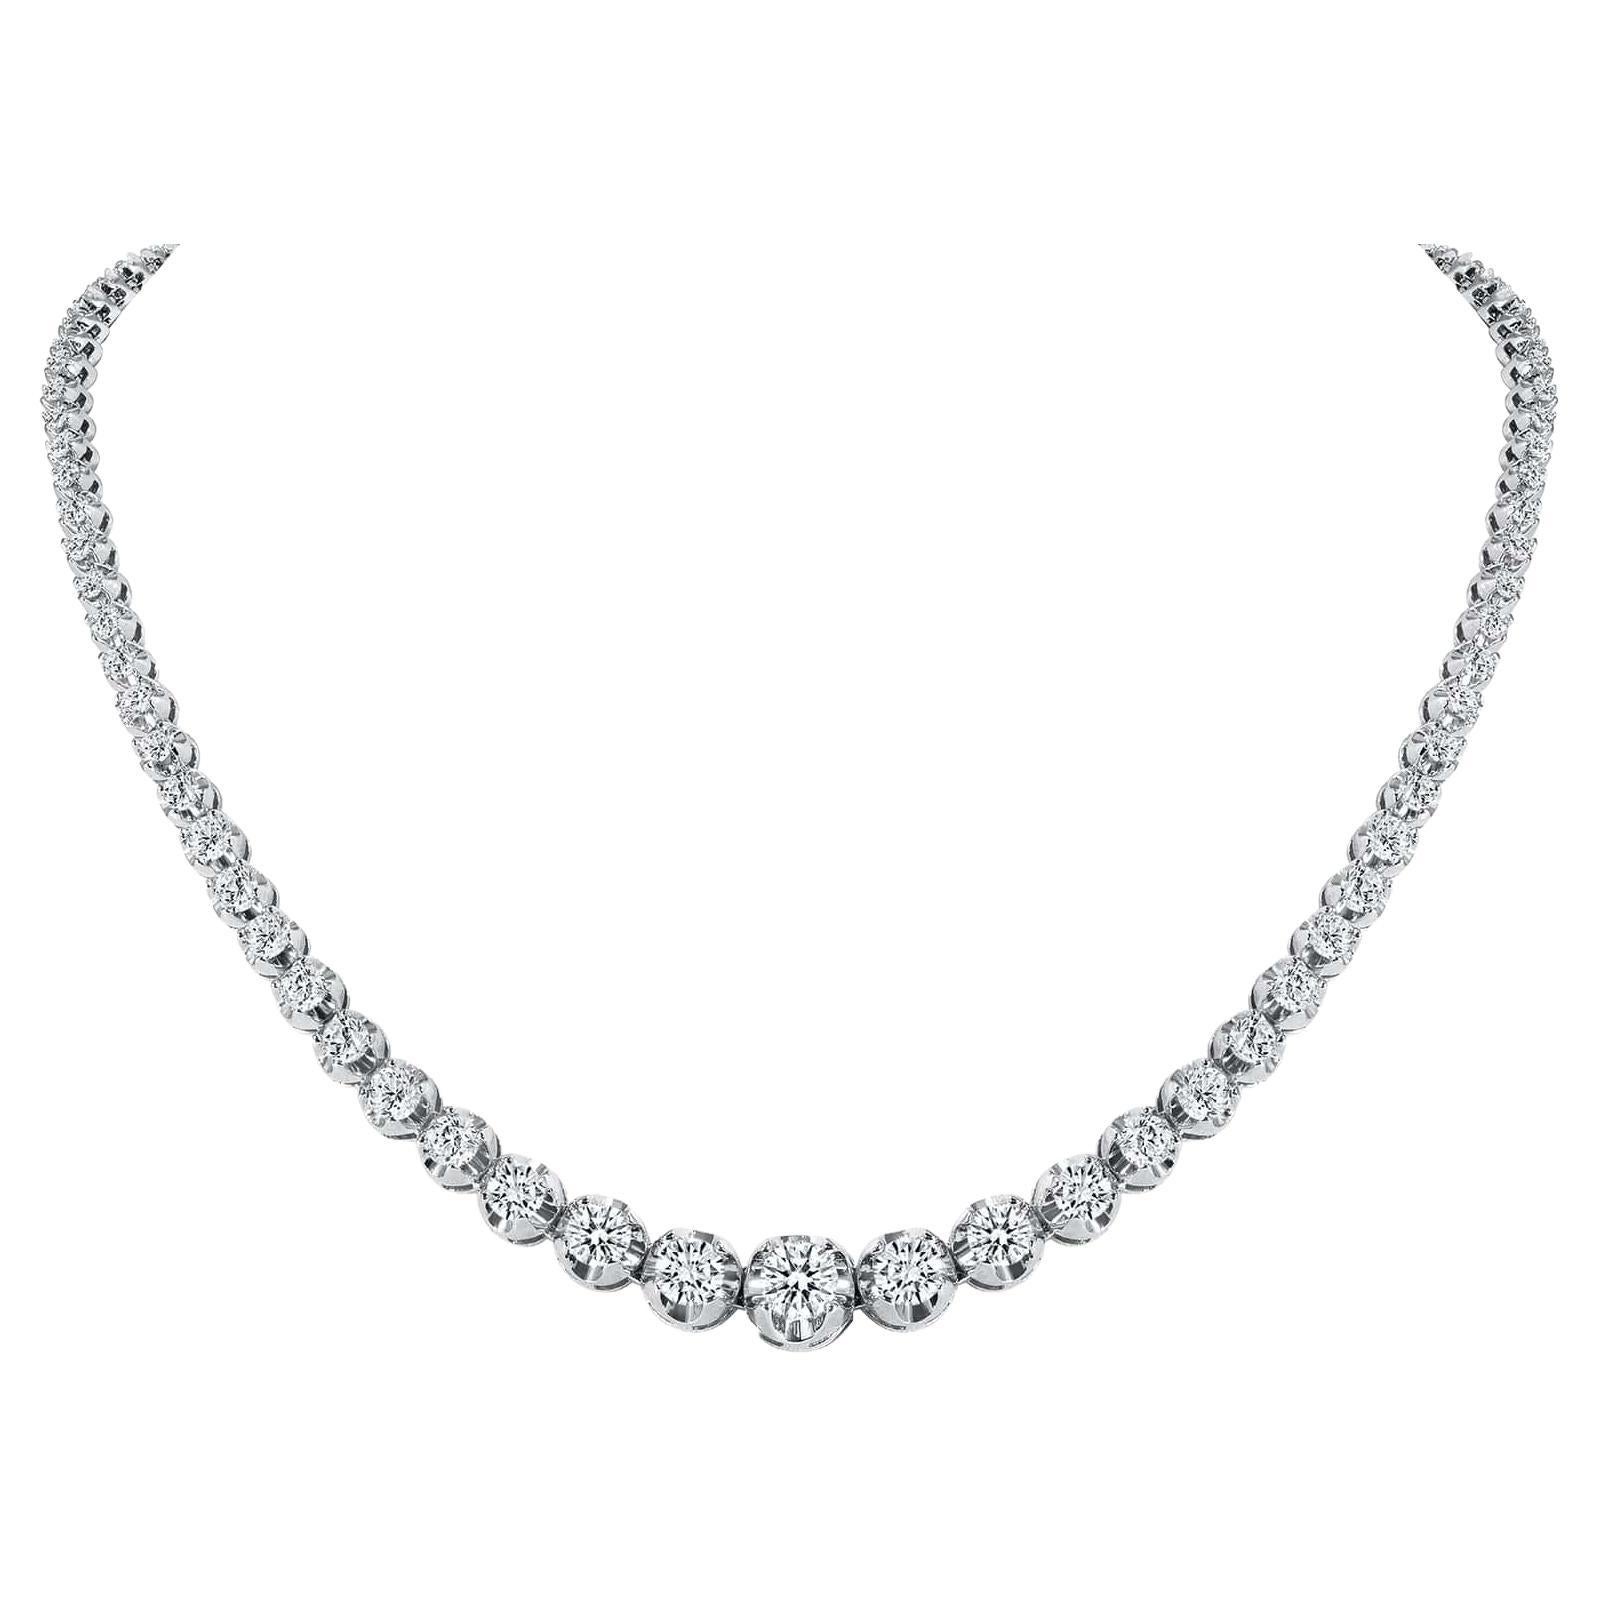 This finely made graduated necklace with beautiful round diamonds sits elegantly on any neck

Necklace Information
Metal : 14k Yellow Gold
Diamond Cut : Round
Total Diamond Carats : 5ct
Diamond Clarity : VS
Diamond Color : G-H
Size : 16 inch
Color :